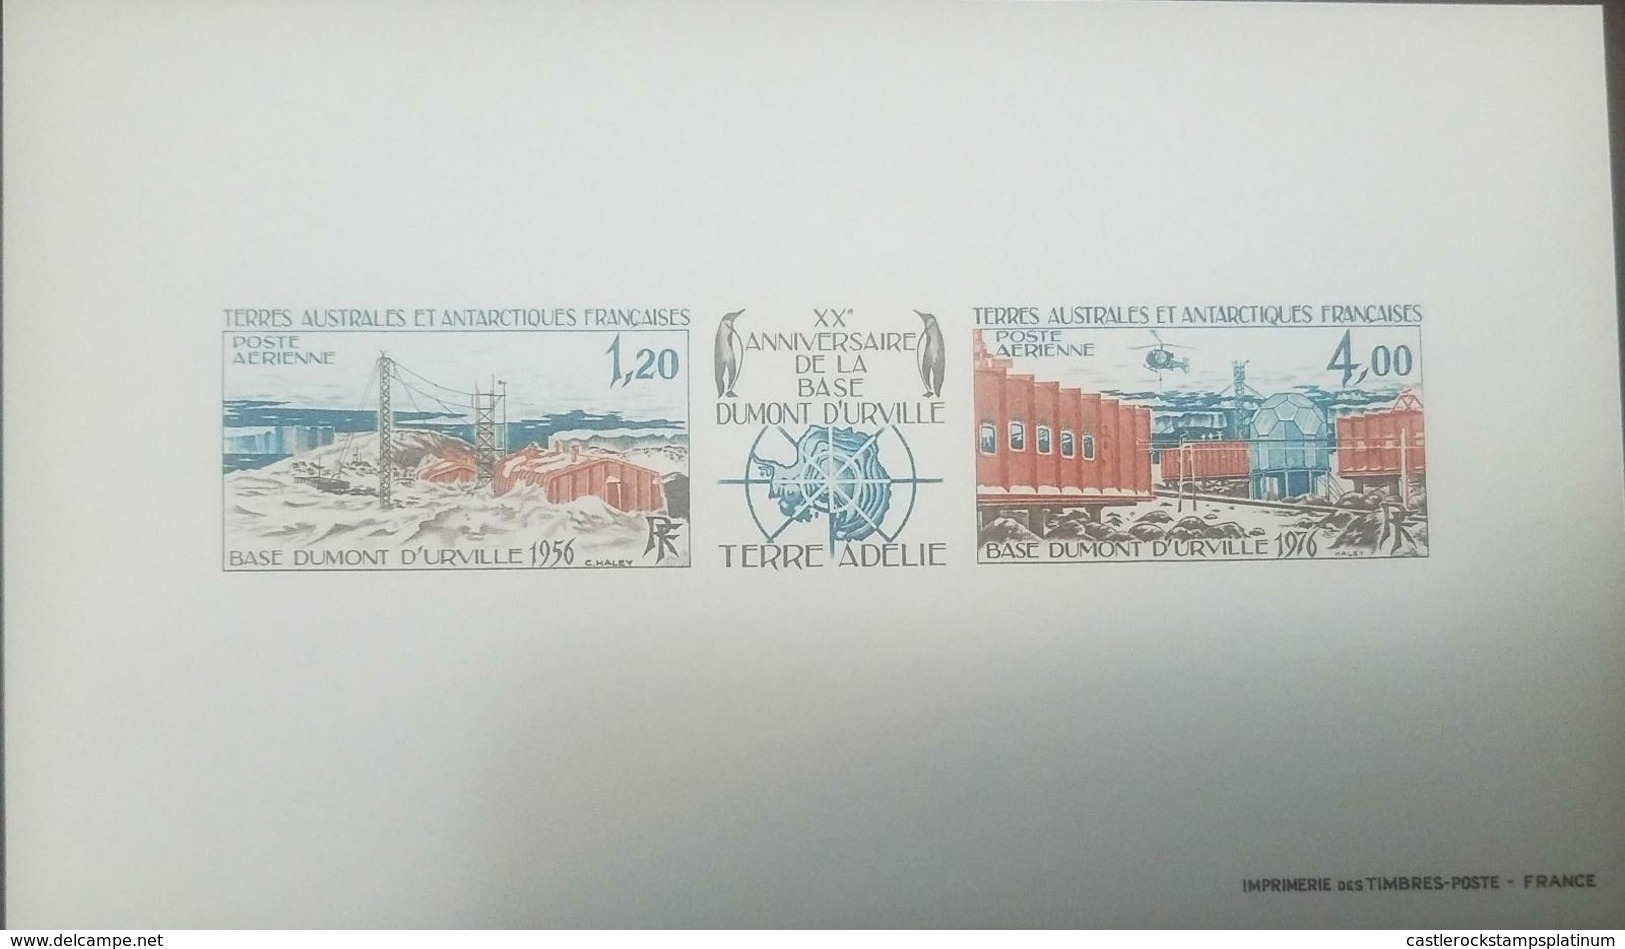 O) 1976 FRENCH SOUTHERN AND ANTARCTIC TERRITORIES, PROOF, SCIENTIFIC-DUMONT D'URVILLE BASE 1956, ADELE LAND ANTARCTIC BA - Imperforates, Proofs & Errors